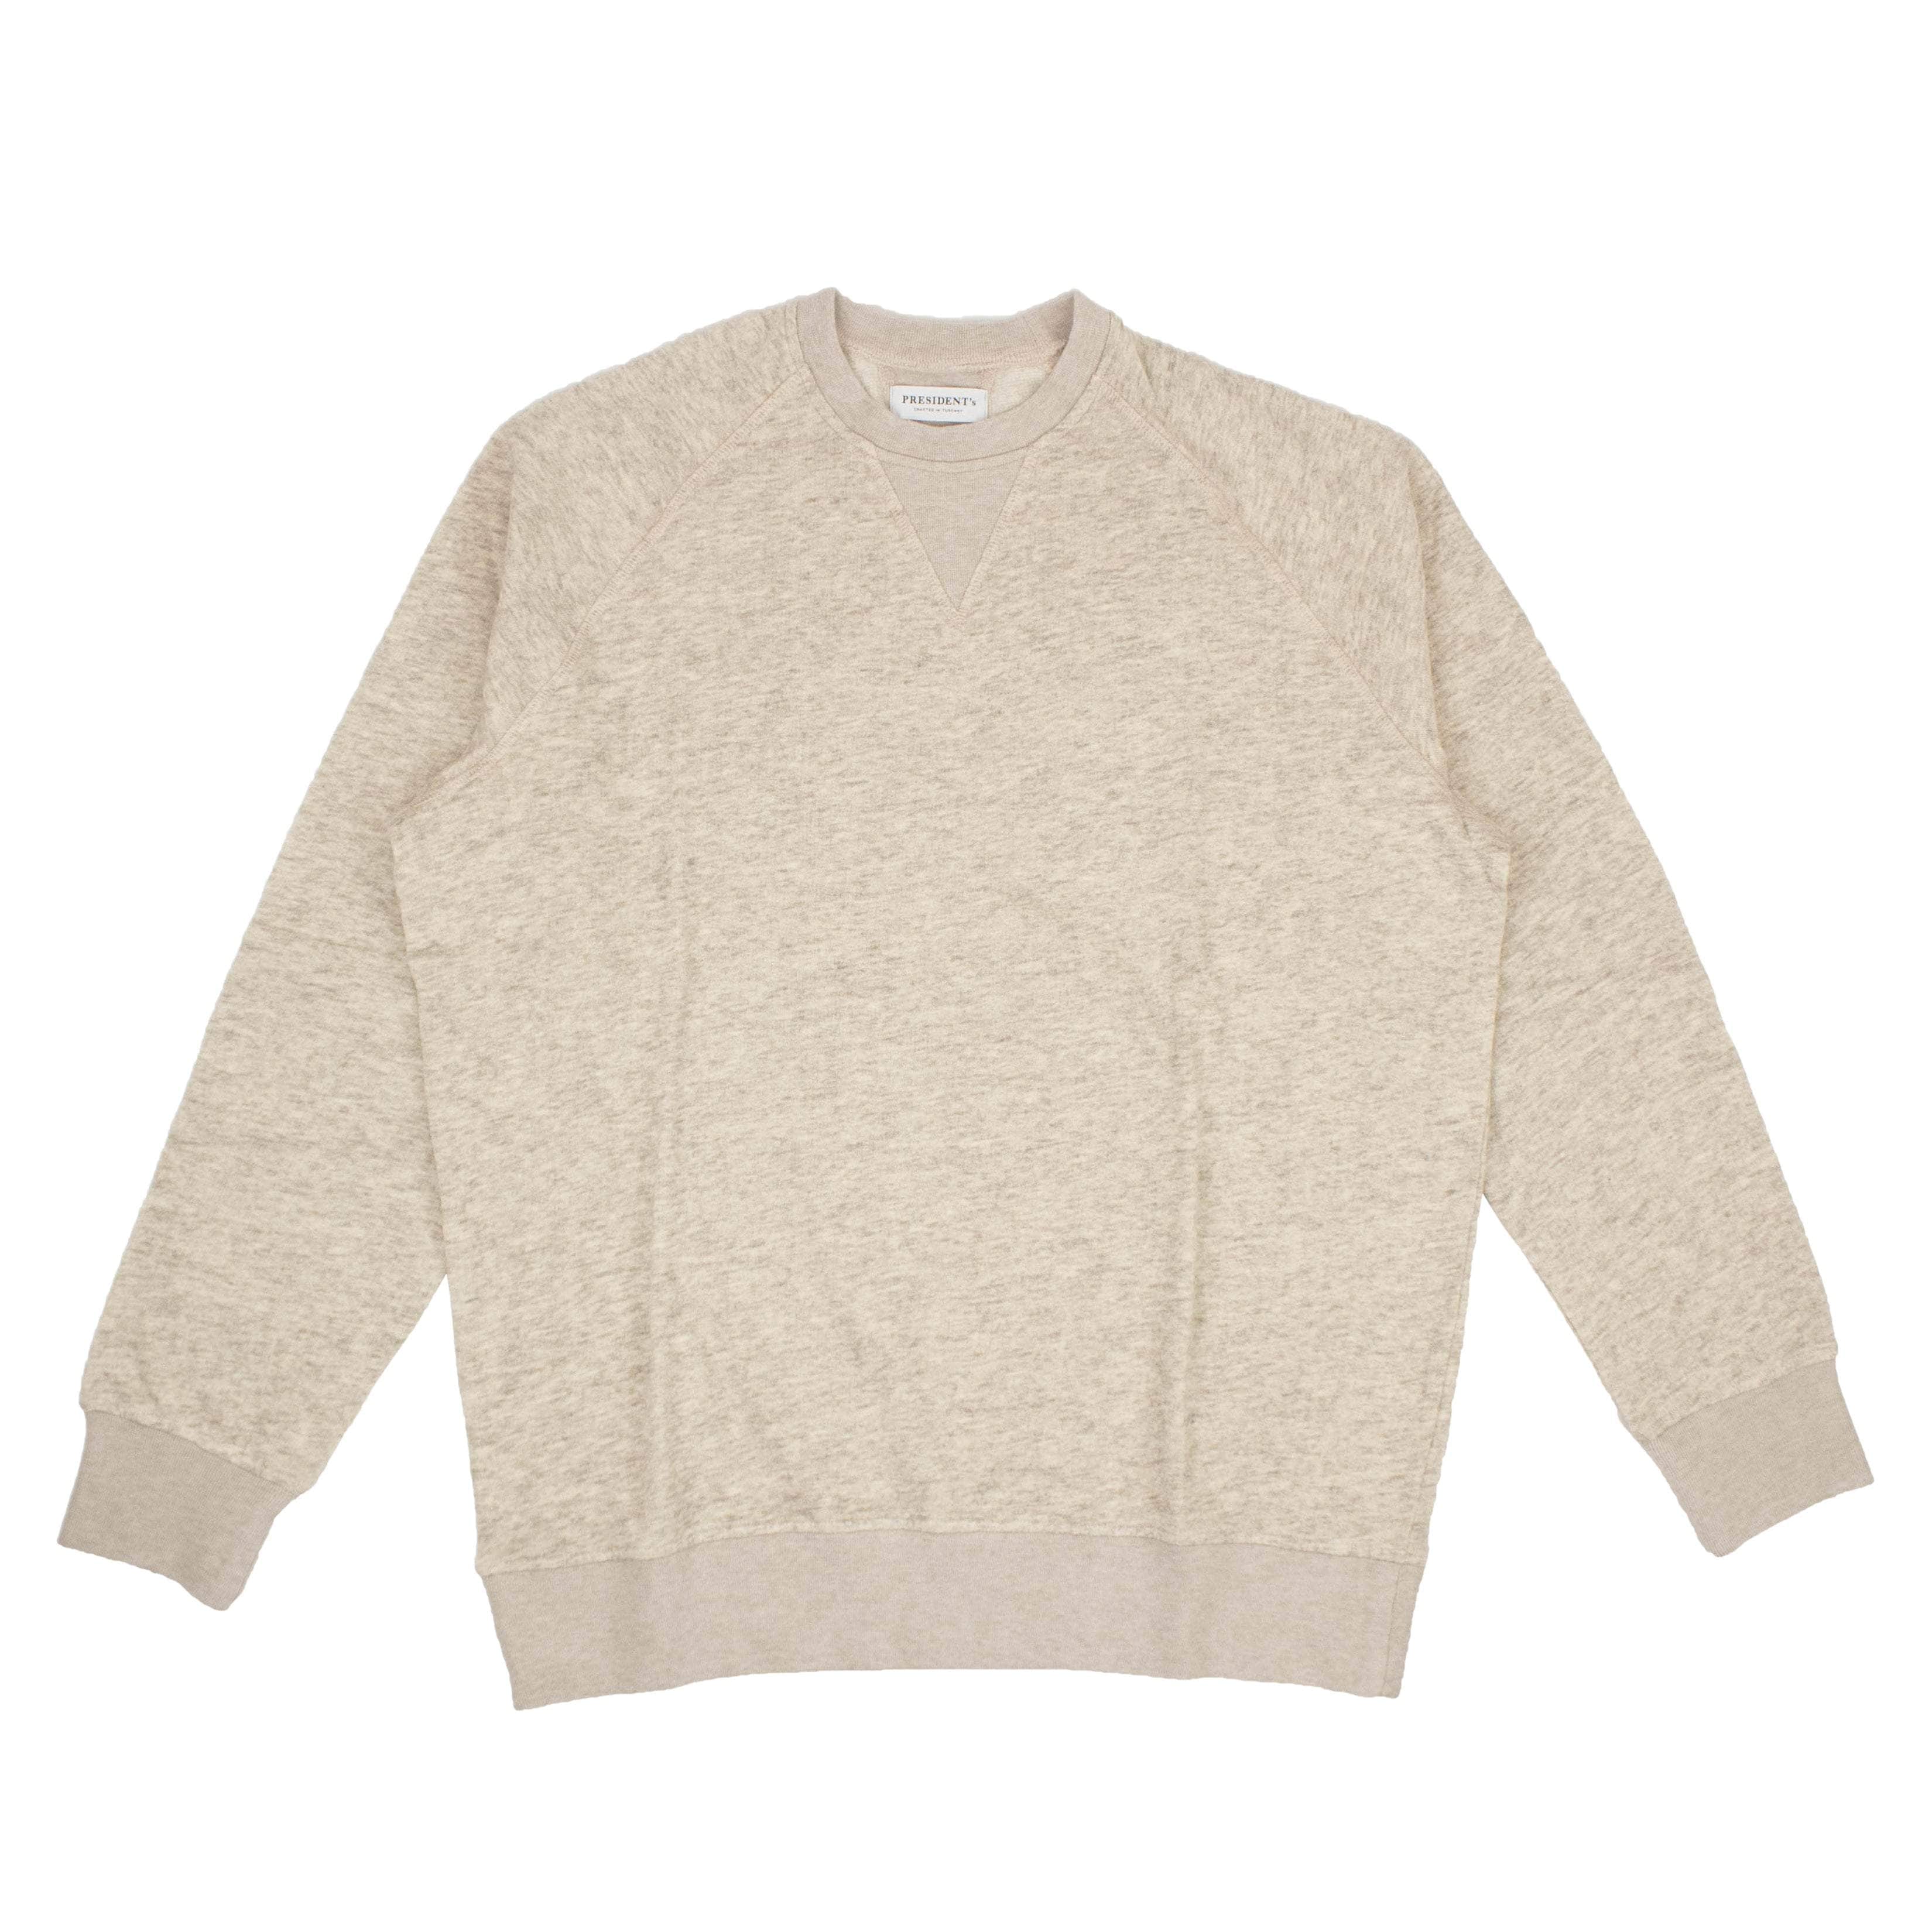 President's channelenable-all, chicmi, couponcollection, gender-mens, main-clothing, mens-crewnecks, mens-shoes, MixedApparel, presidents, size-l, size-xl, under-250 Beige Crew Yak Wool Pullover Sweater